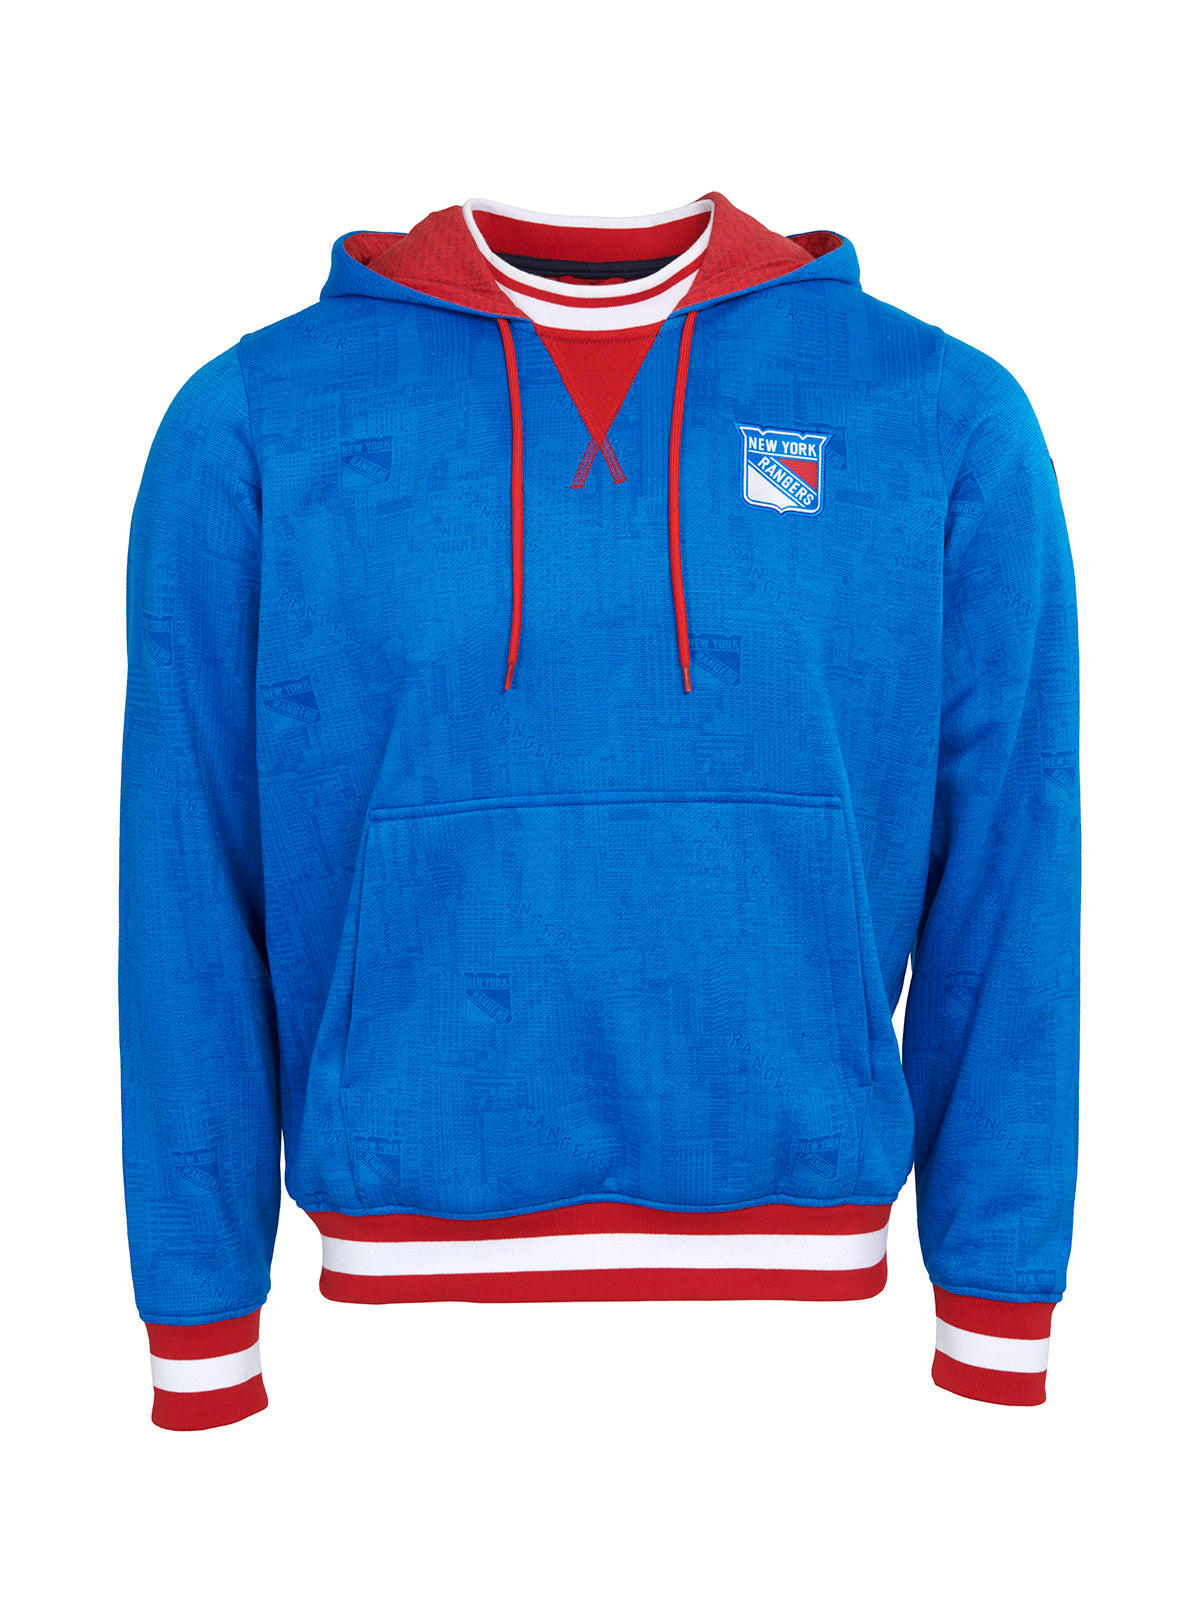 New York Rangers Hoodie - Show your team spirit, with the iconic team logo patch on the front left chest, and proudly display your New York Rangers support in their team colors with this NHL hockey hoodie.